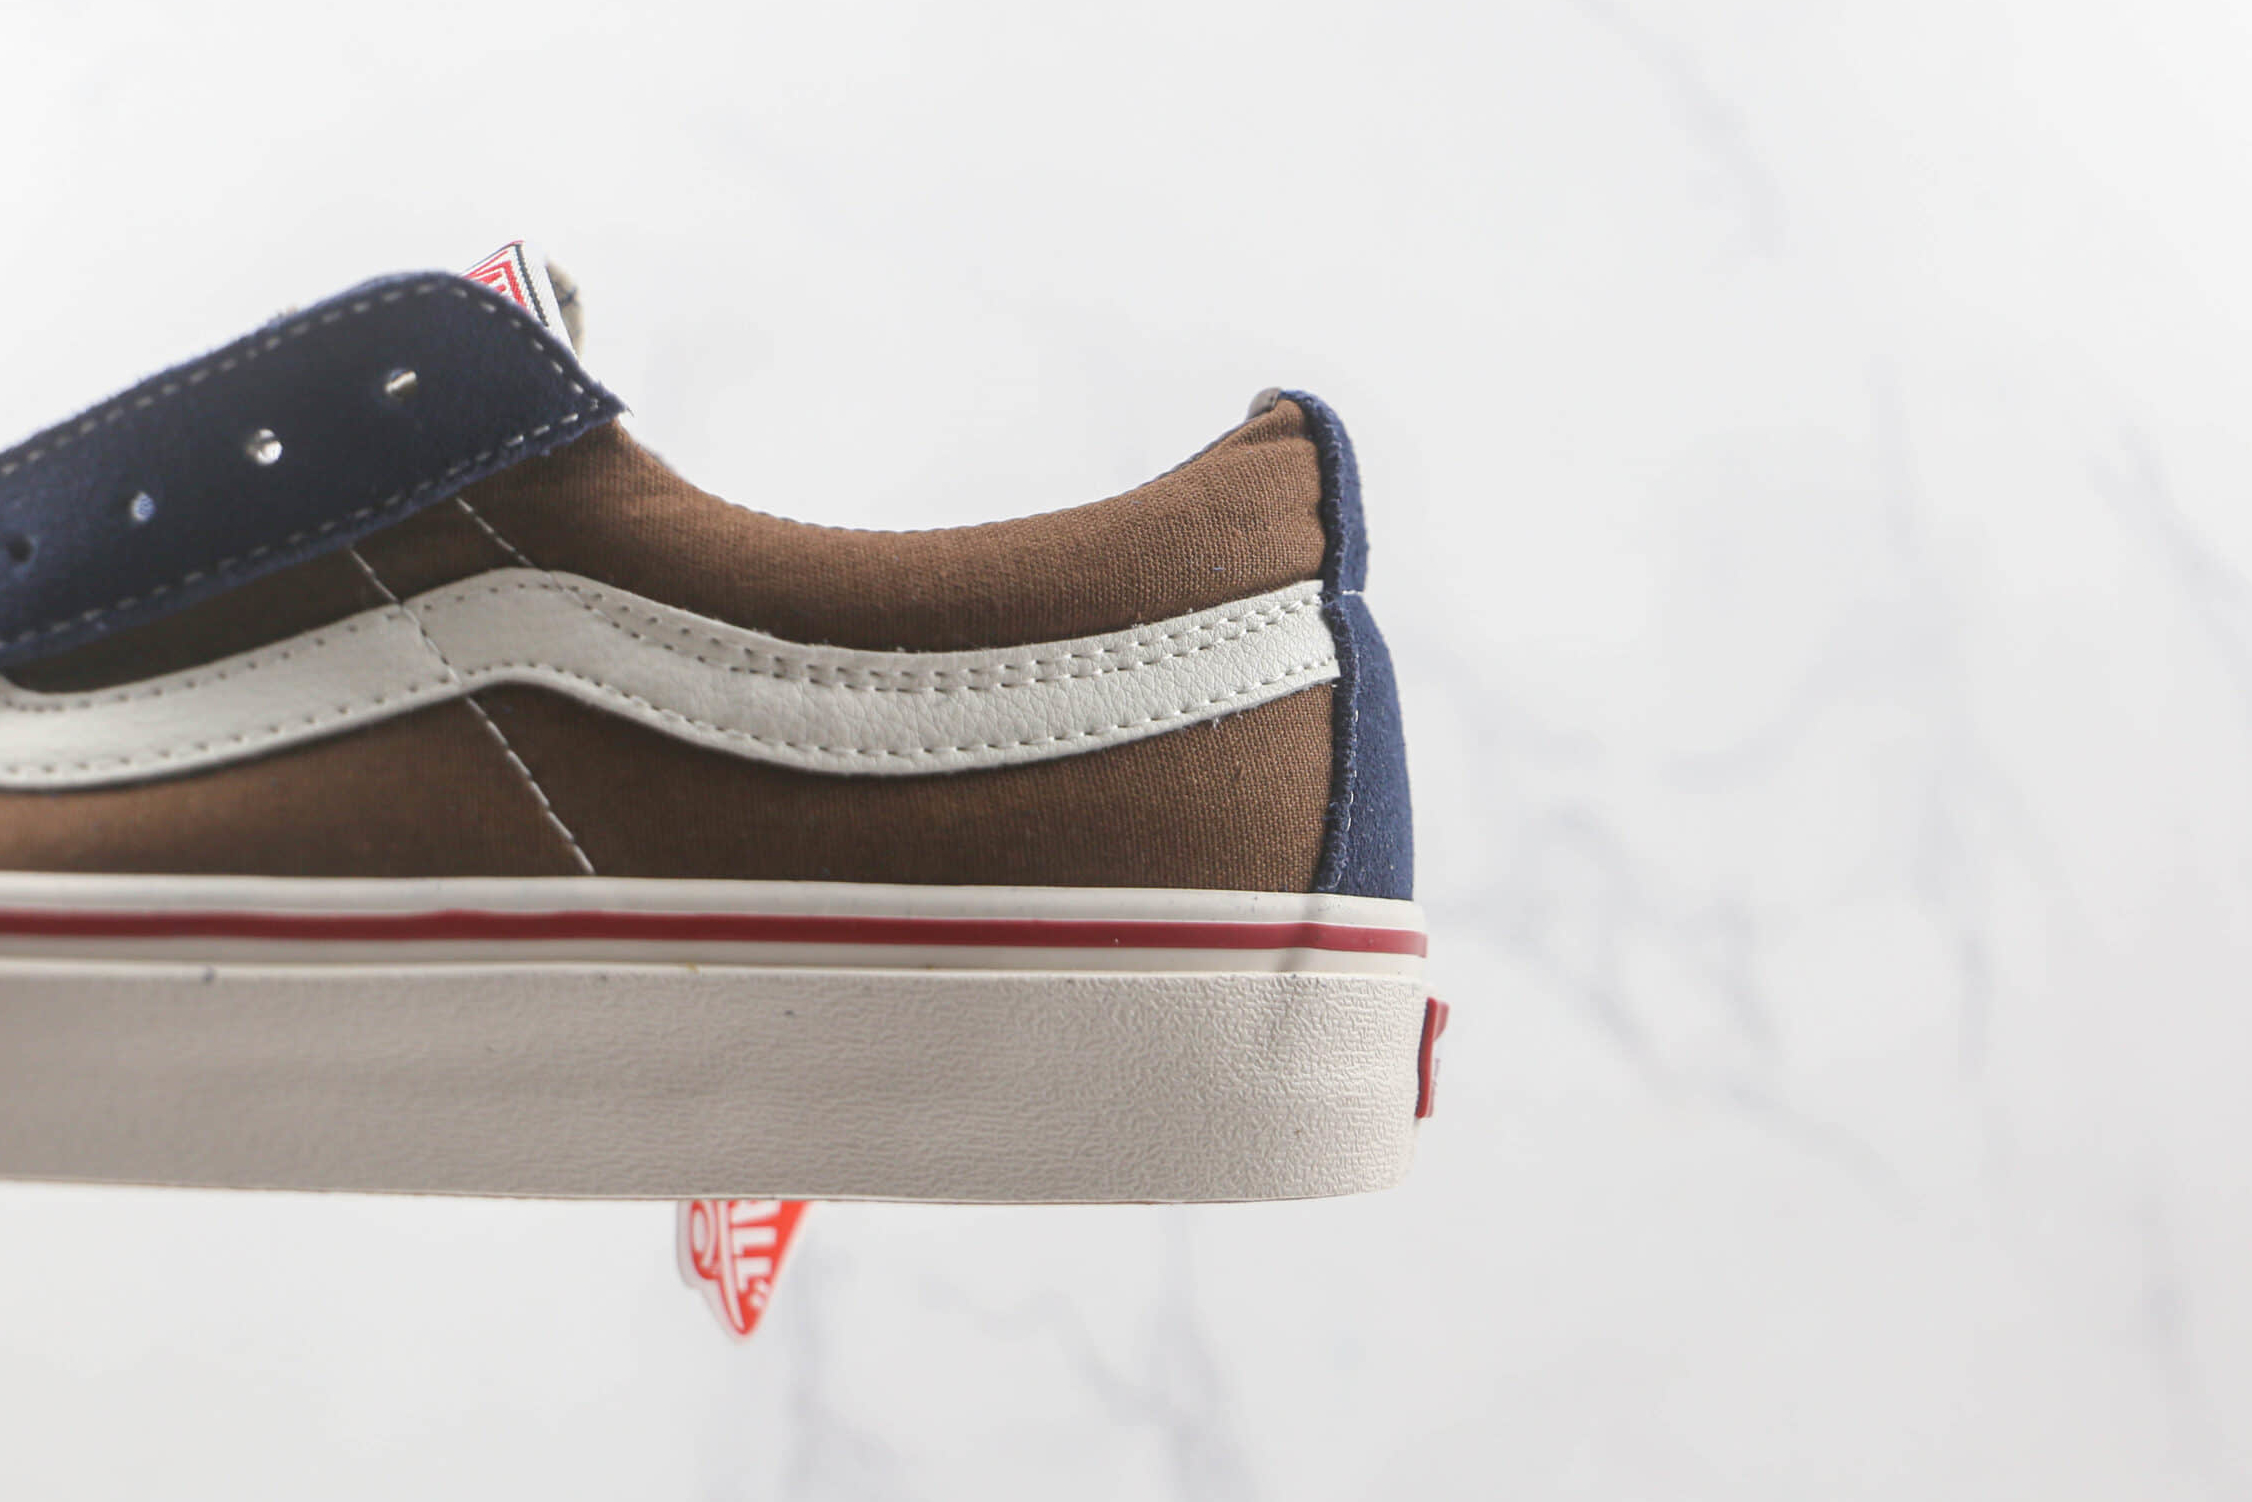 Vans SK8-Low Sneakers Blue/Brown - Unisex Shoes [Free Shipping]